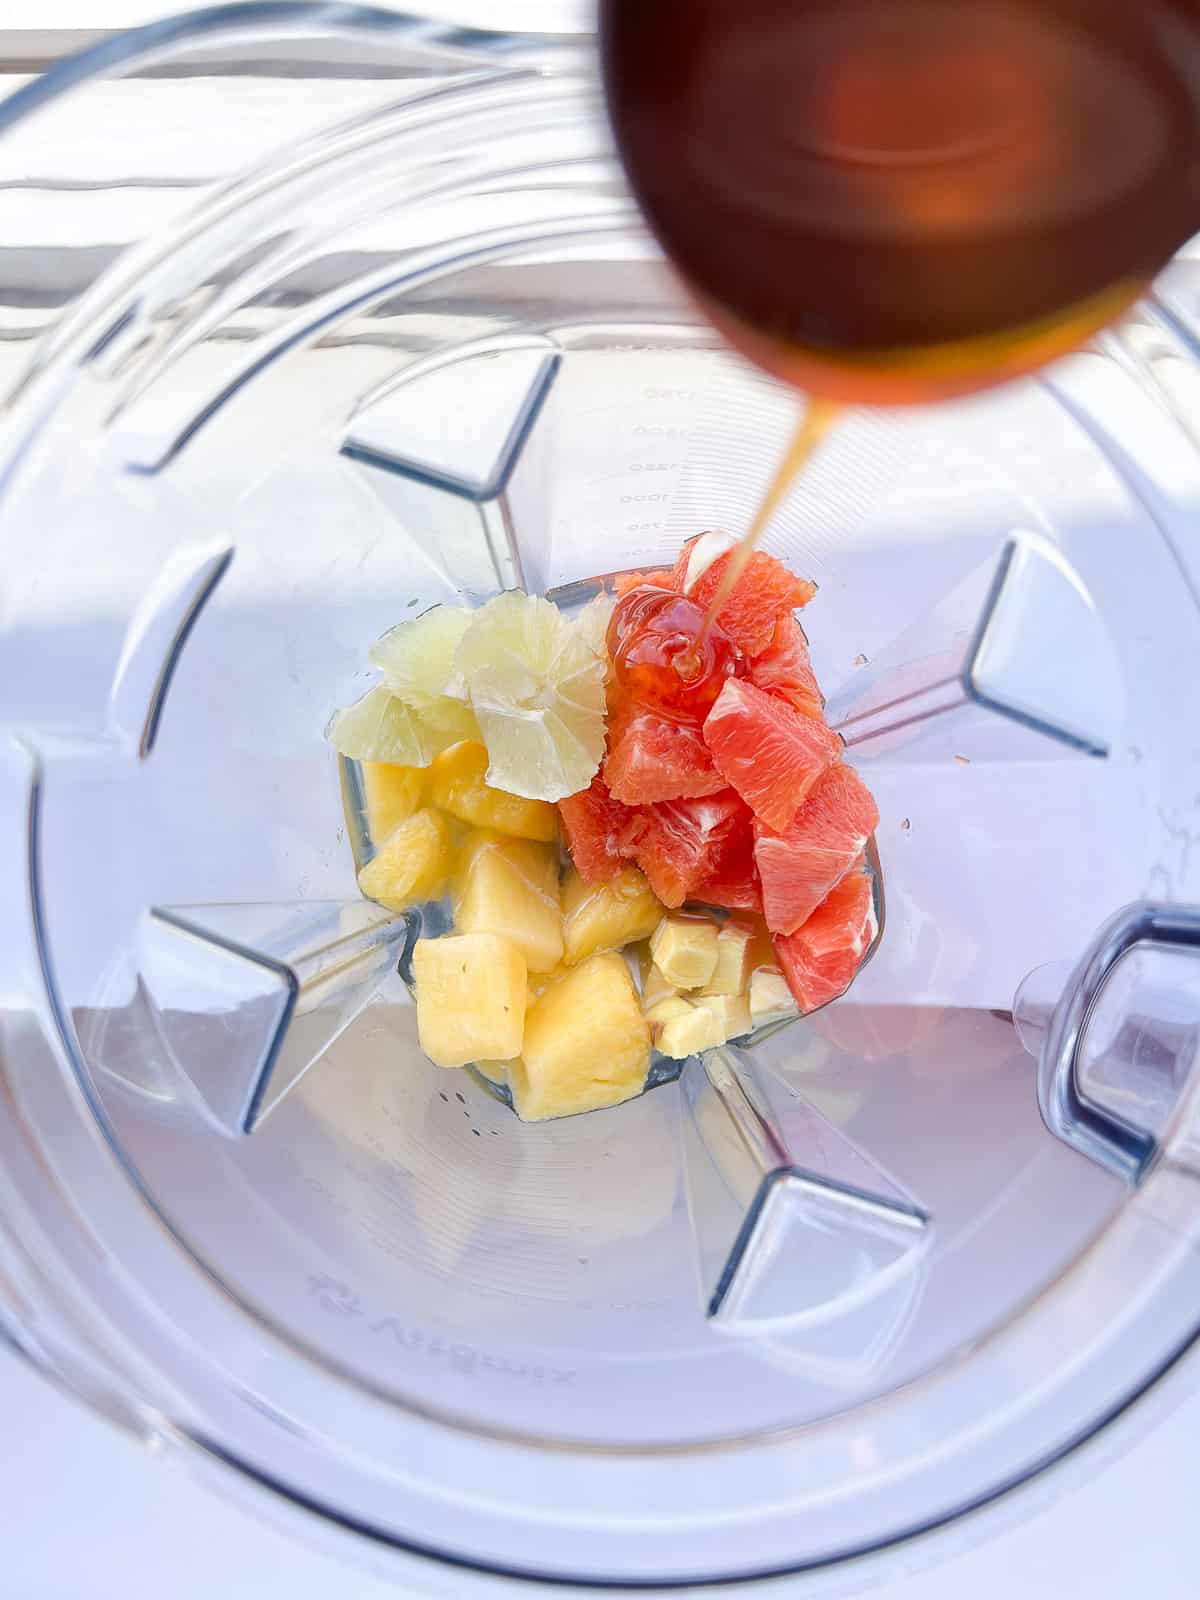 Fruit inside a blender cannister ready to be blended, with honey being drizzled in from a spoon.